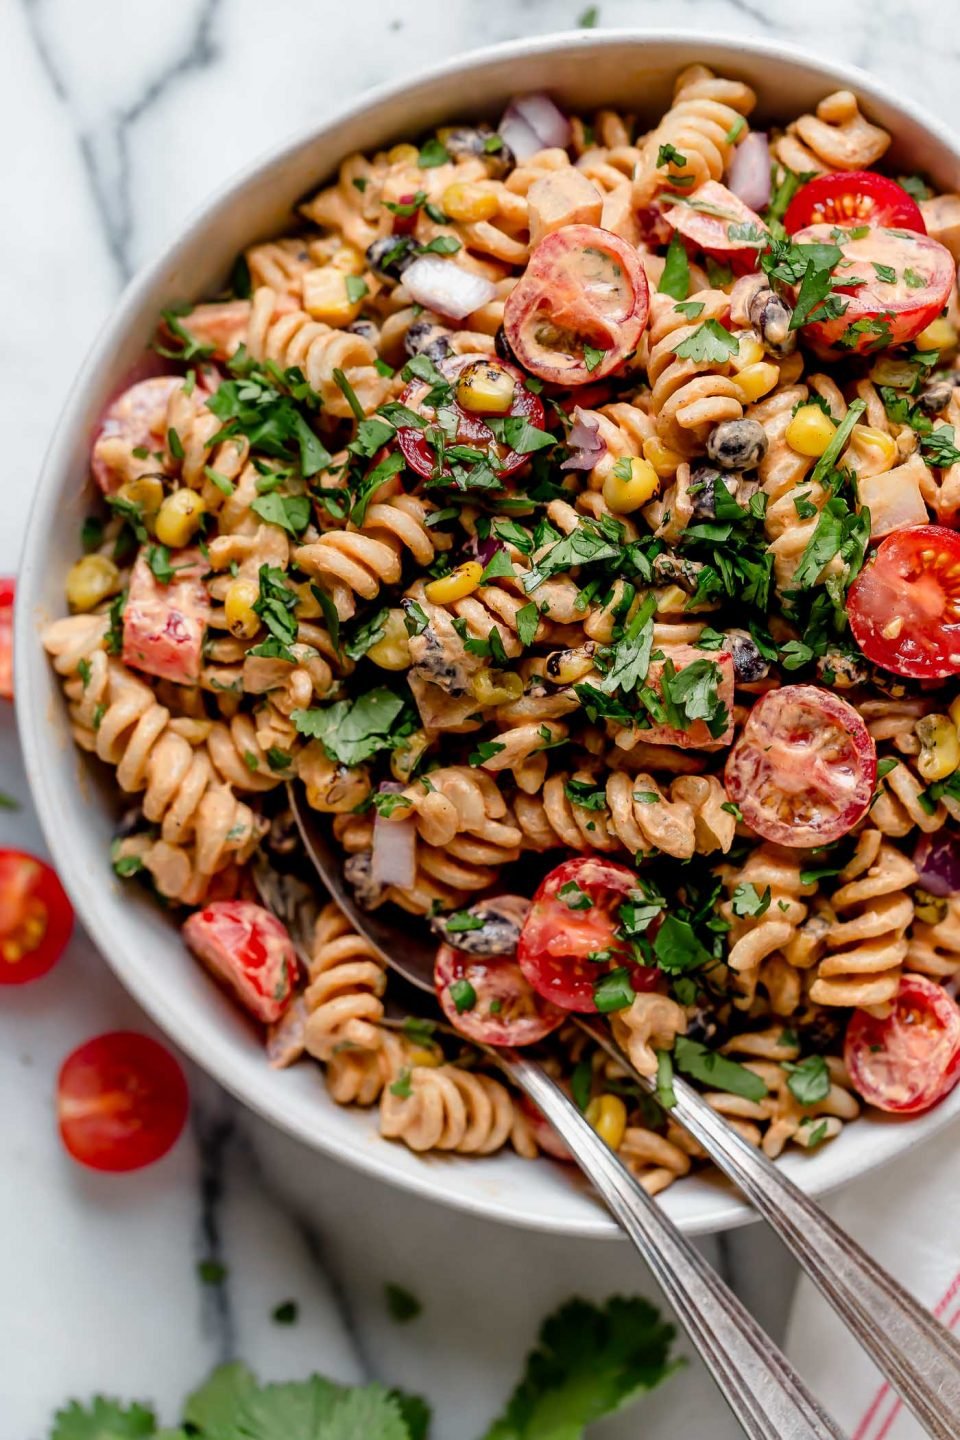 Vegan southwest pasta salad in a white bowl, served with 2 large serving spoons.